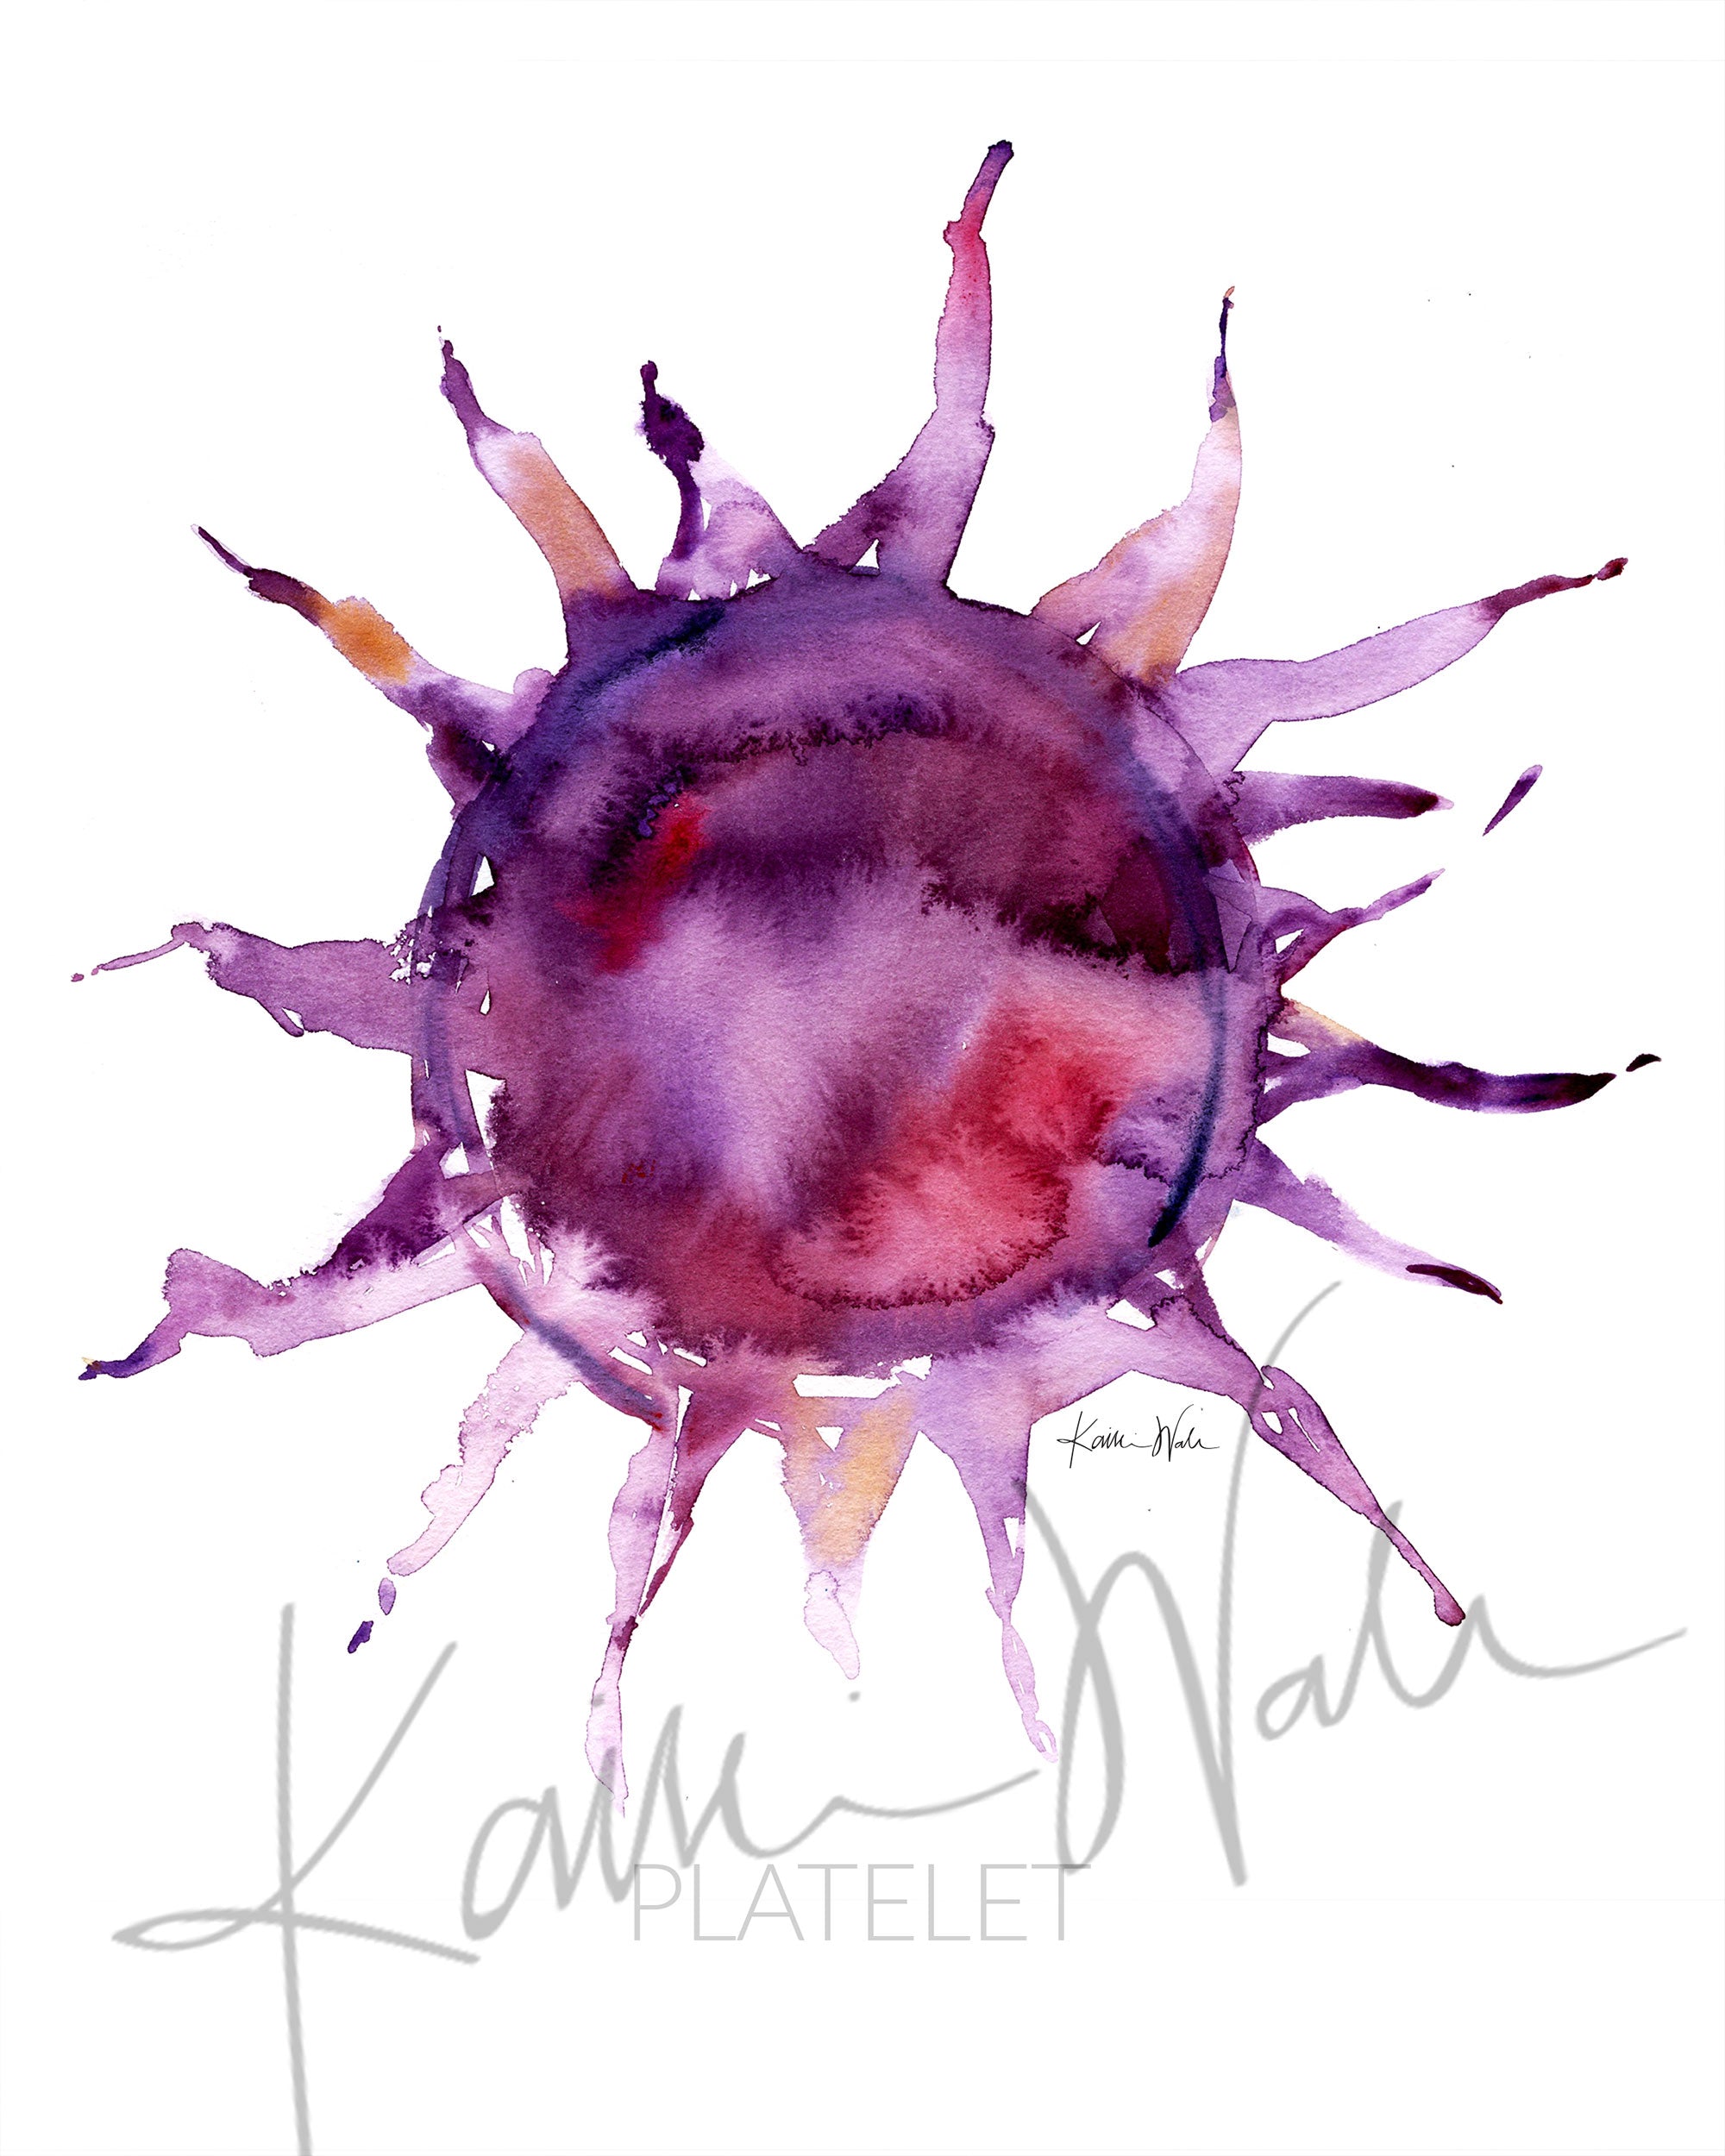 Unframed watercolor painting of a platelet.